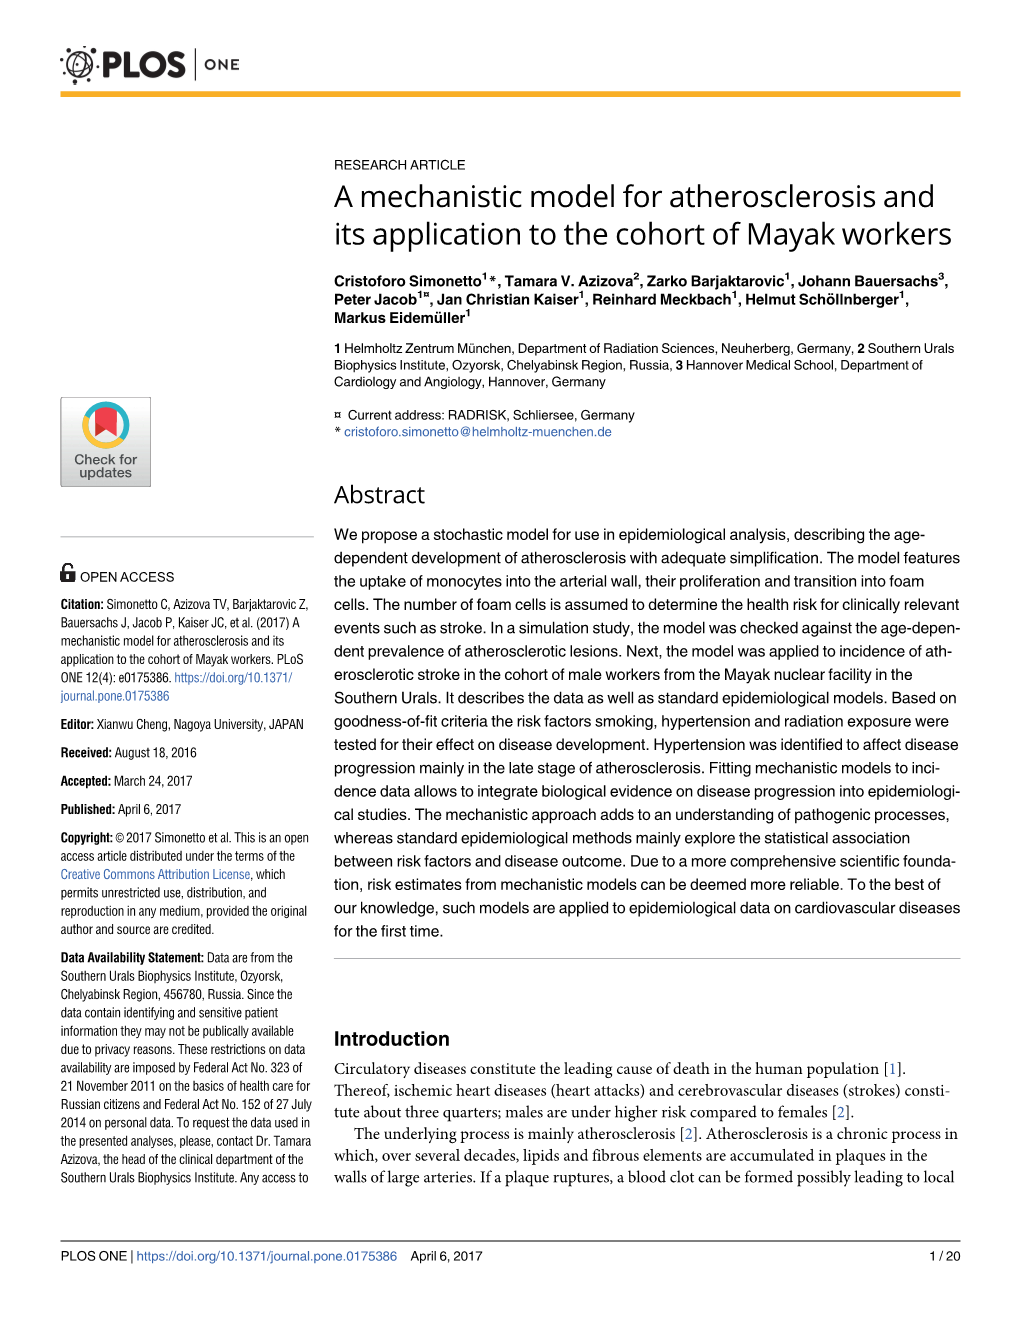 A Mechanistic Model for Atherosclerosis and Its Application to the Cohort of Mayak Workers